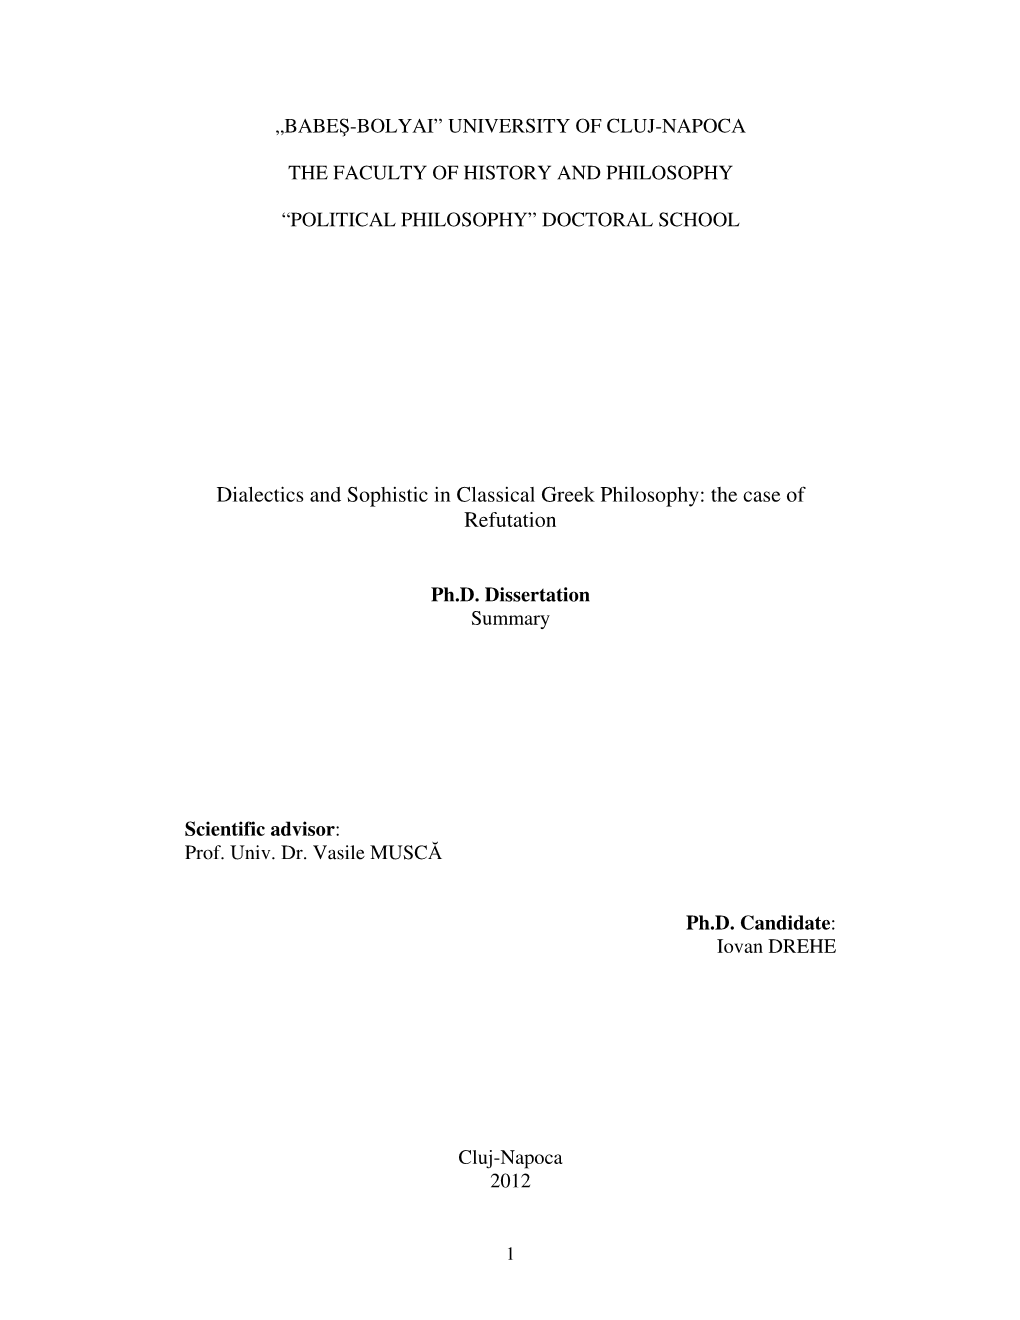 Dialectics and Sophistic in Classical Greek Philosophy: the Case of Refutation